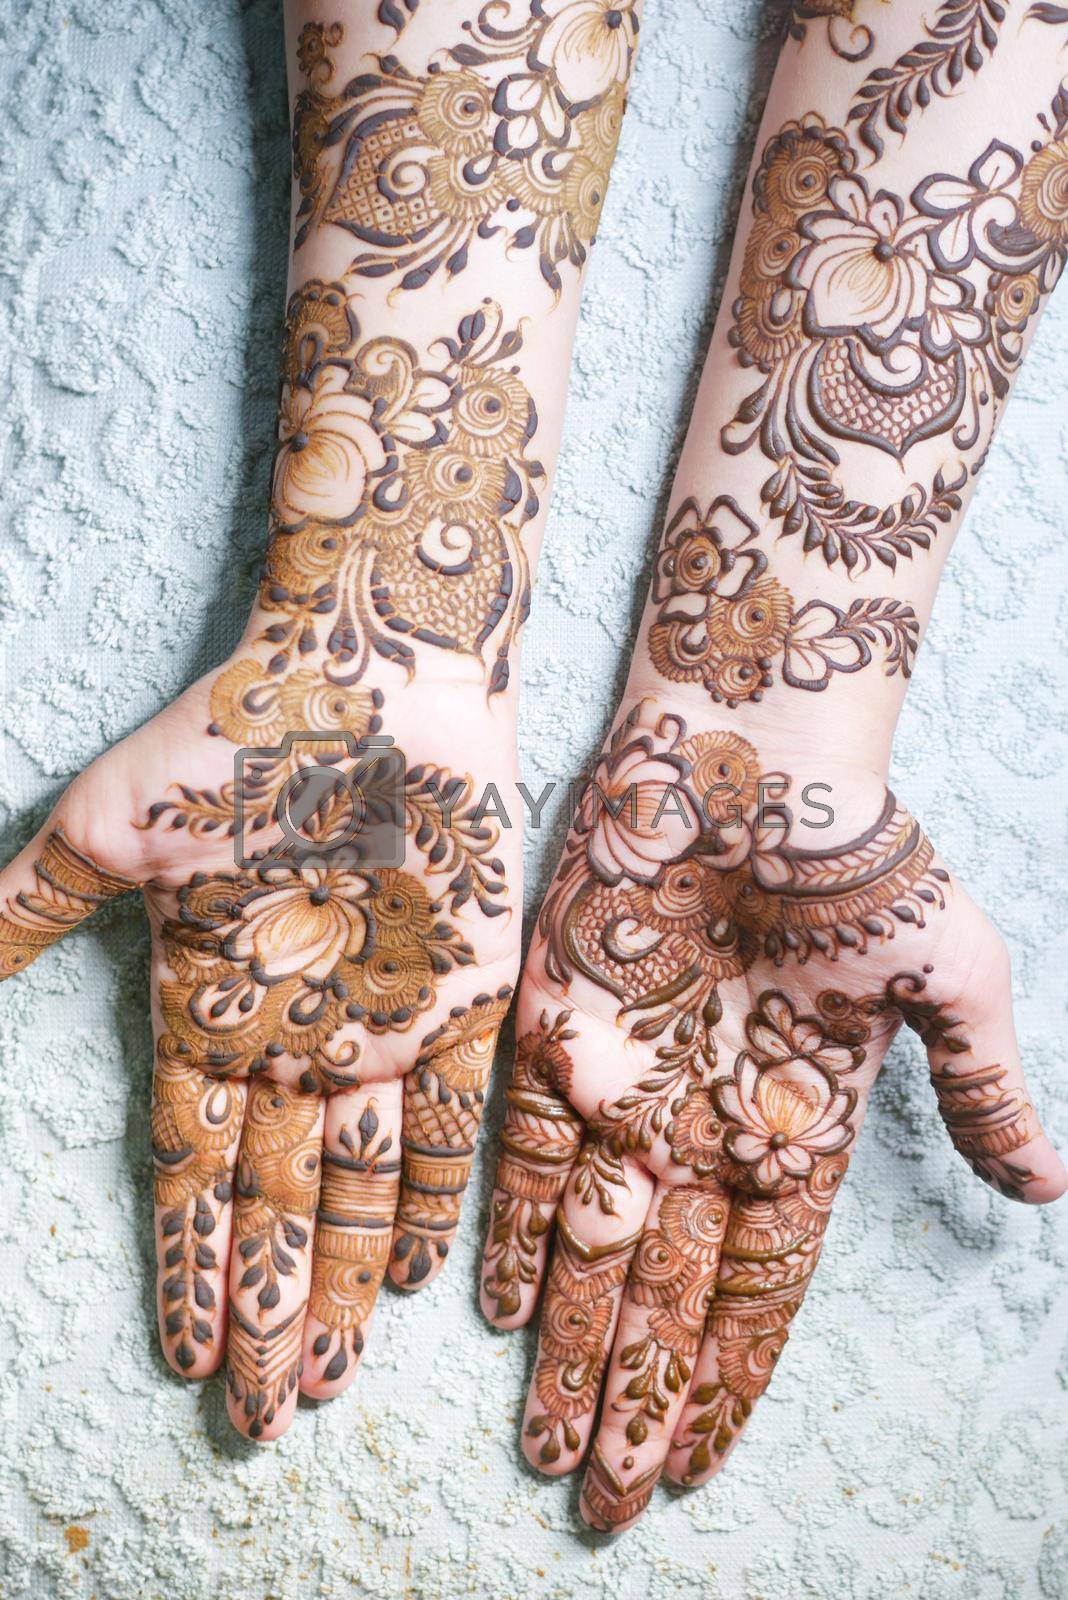 Royalty free image of women applying henna on hand by towfiq007